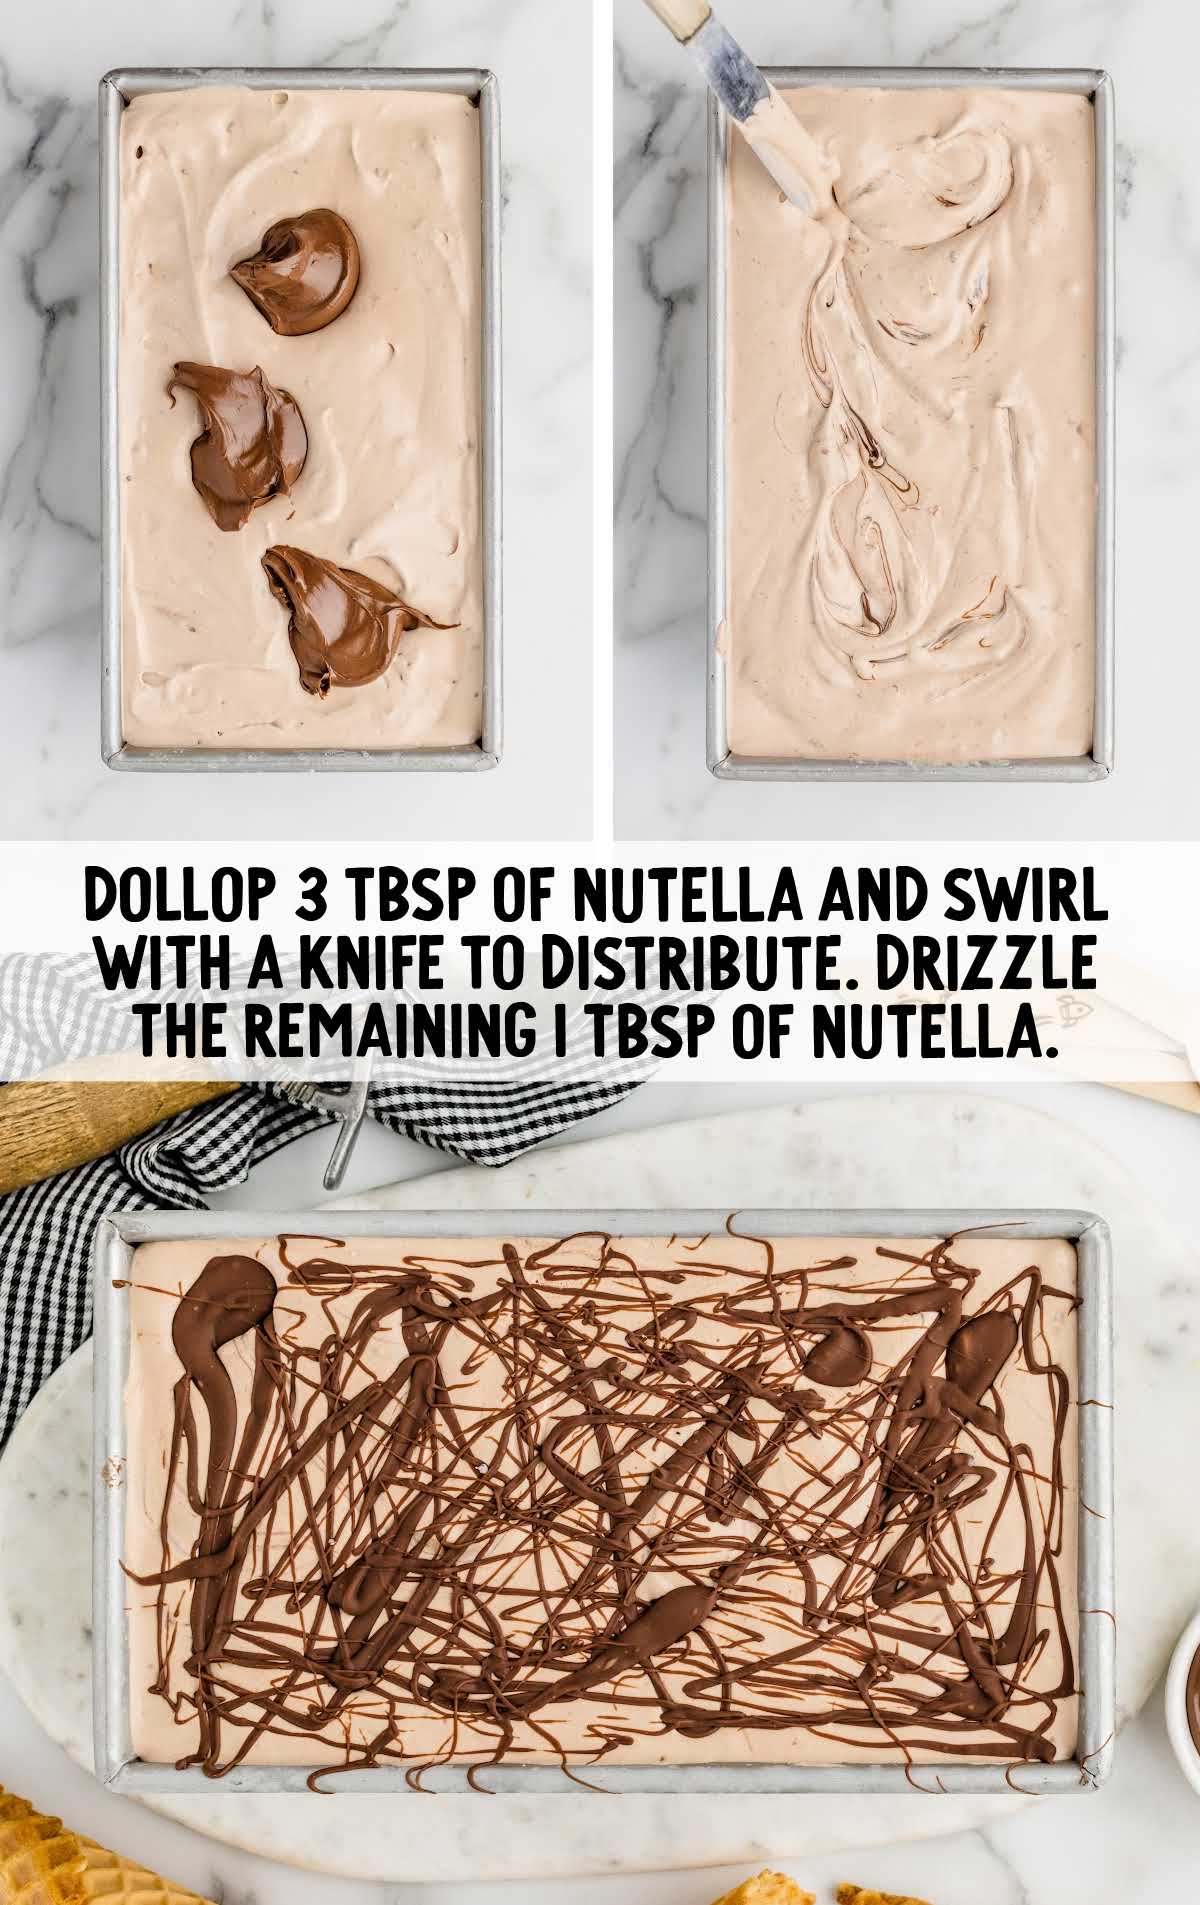 nutella spread then drizzled on top of the ice cream